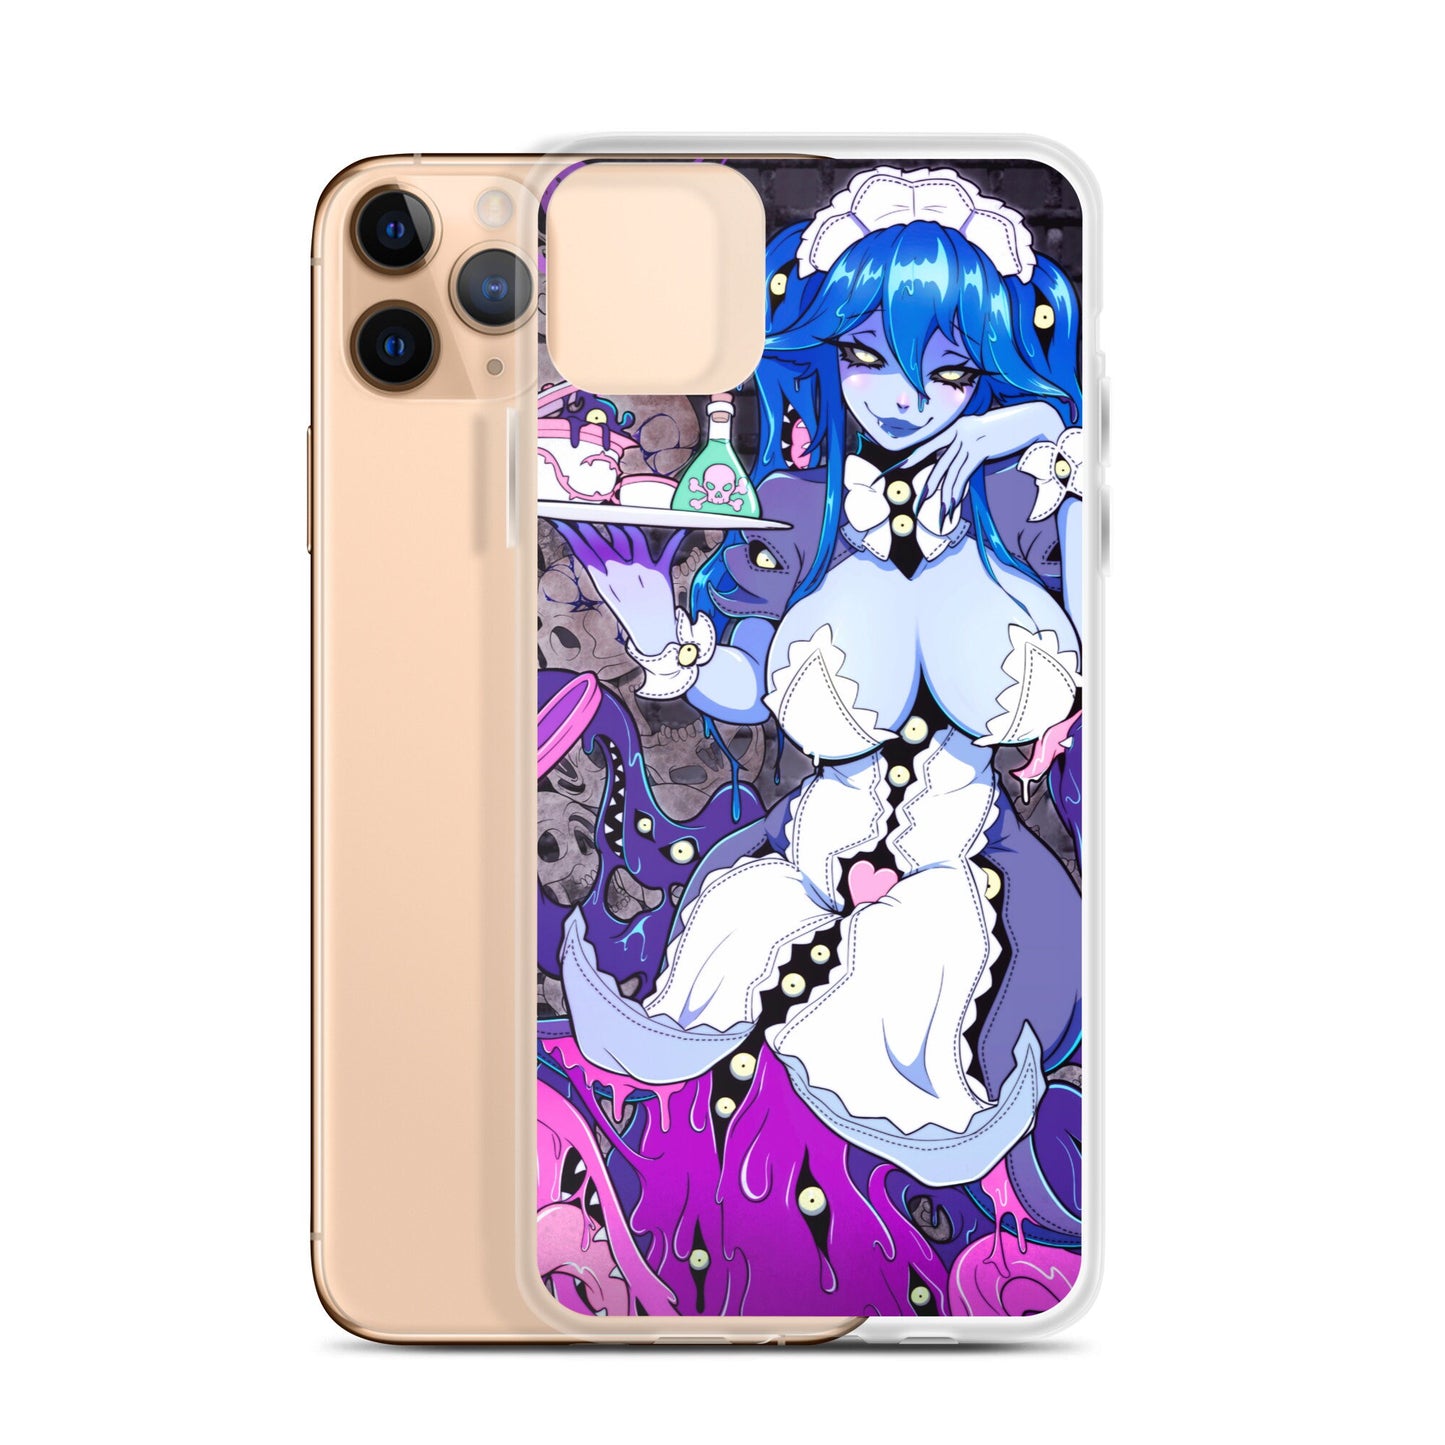 Tentacle Tease iPhone case